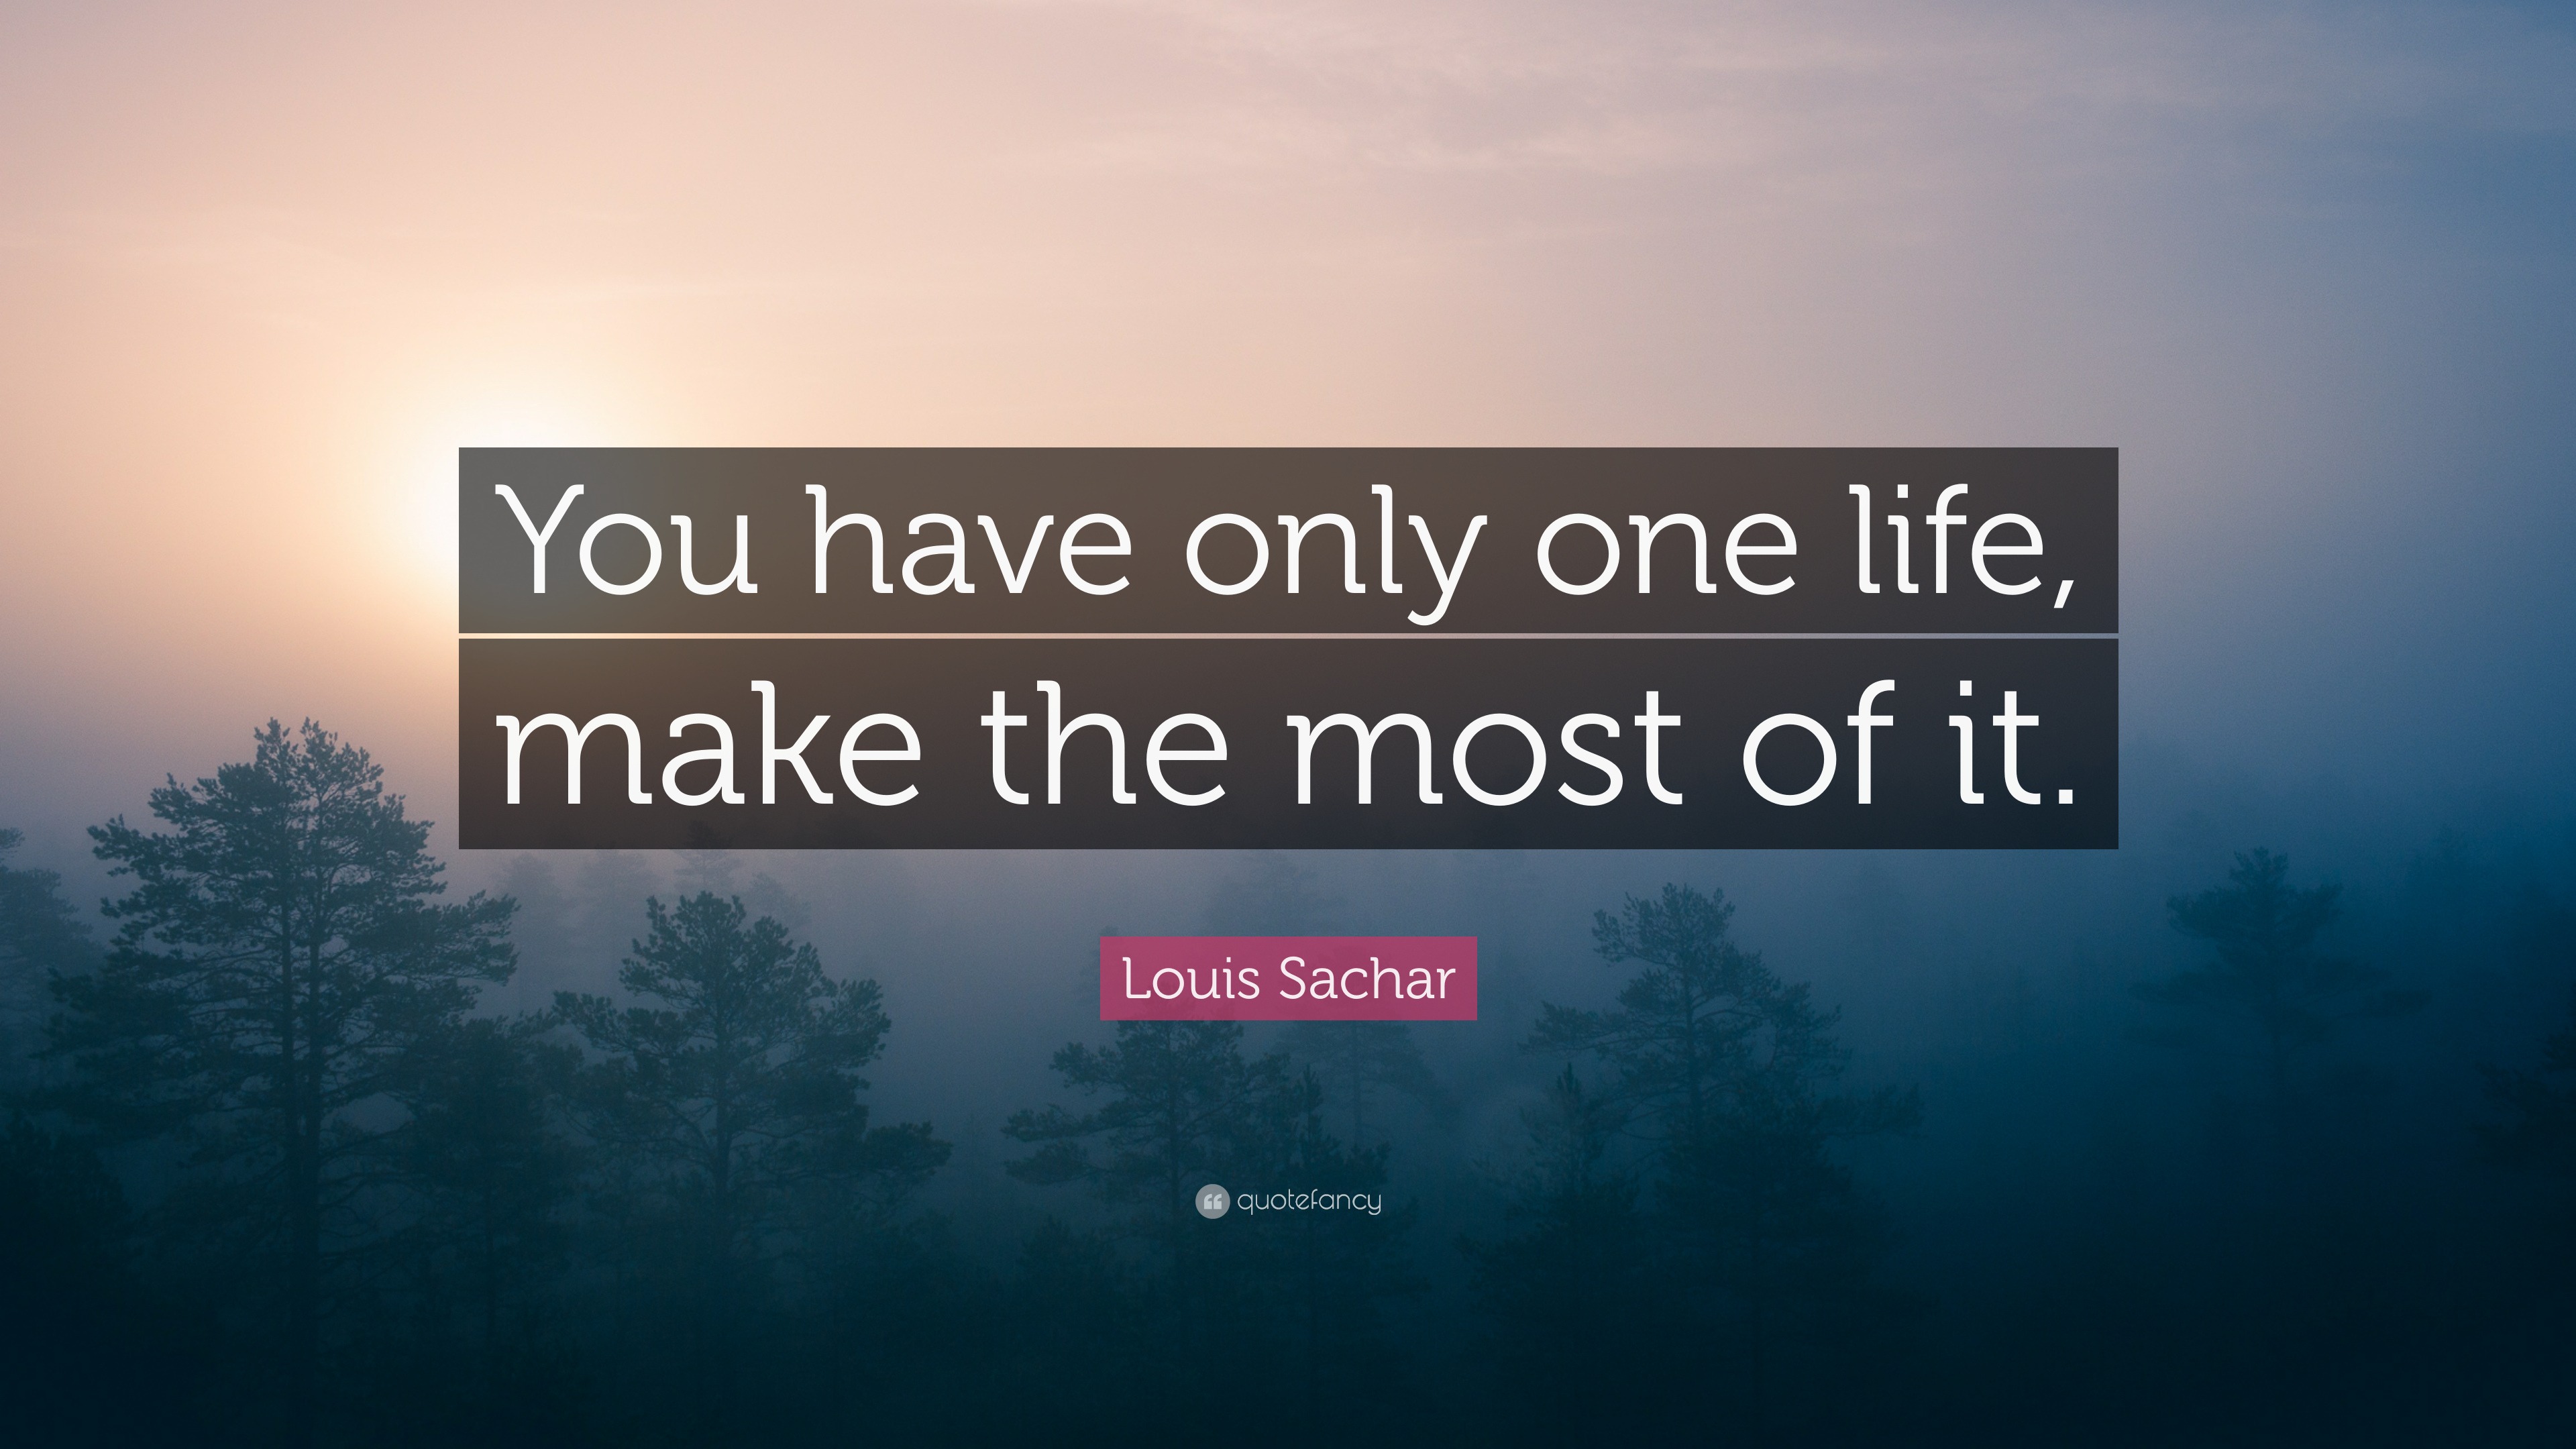 Louis Sachar Quote: "You have only one life, make the most ...